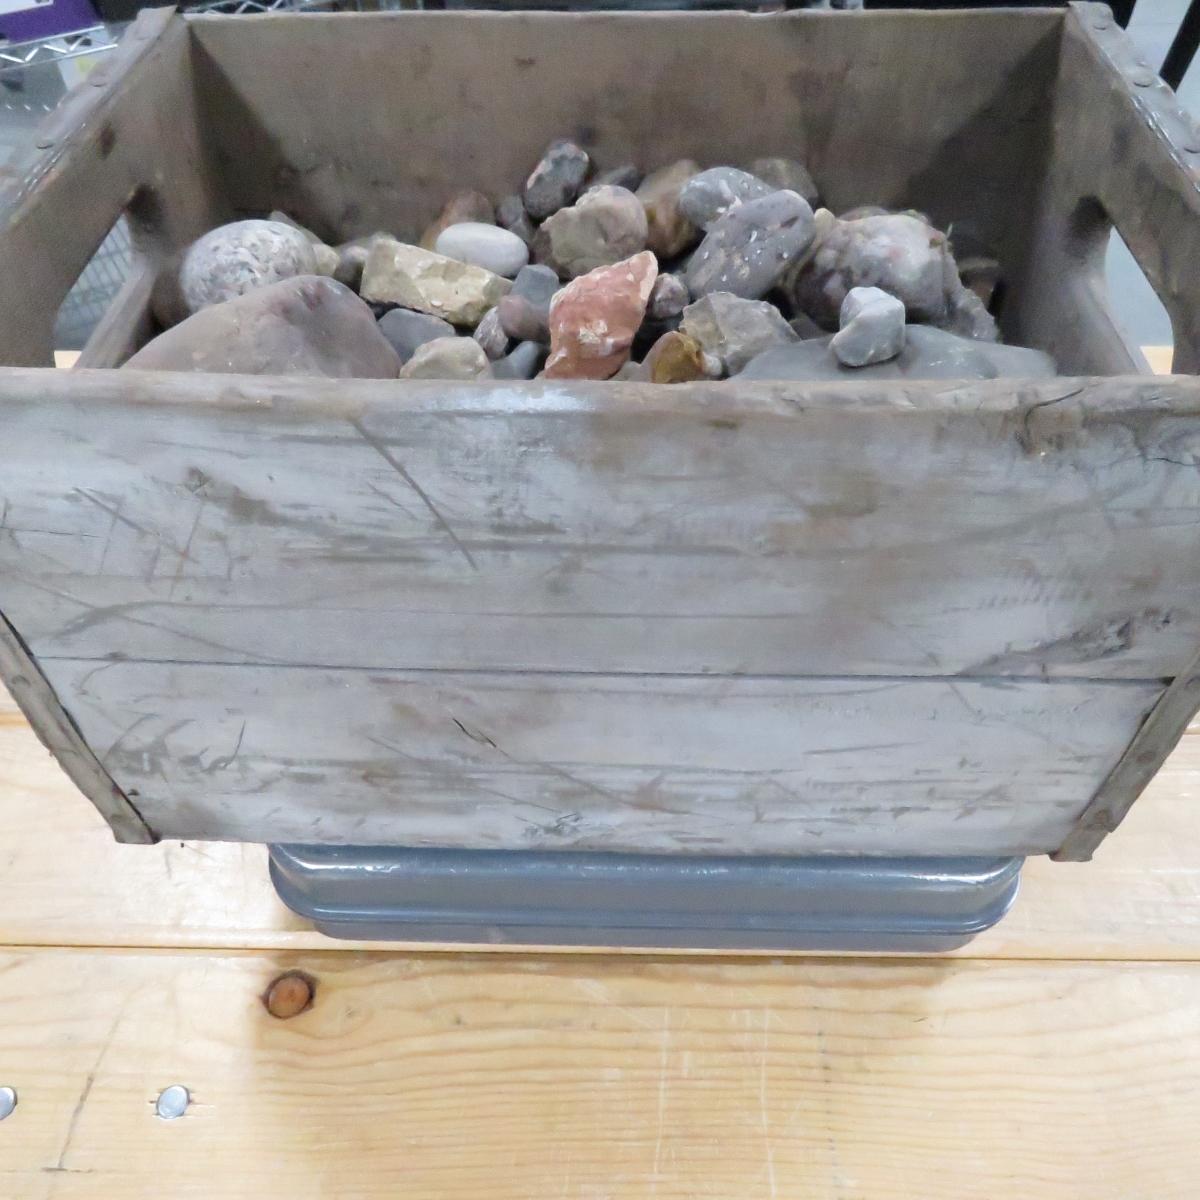 55 pounds mixed rocks and minerals in crate